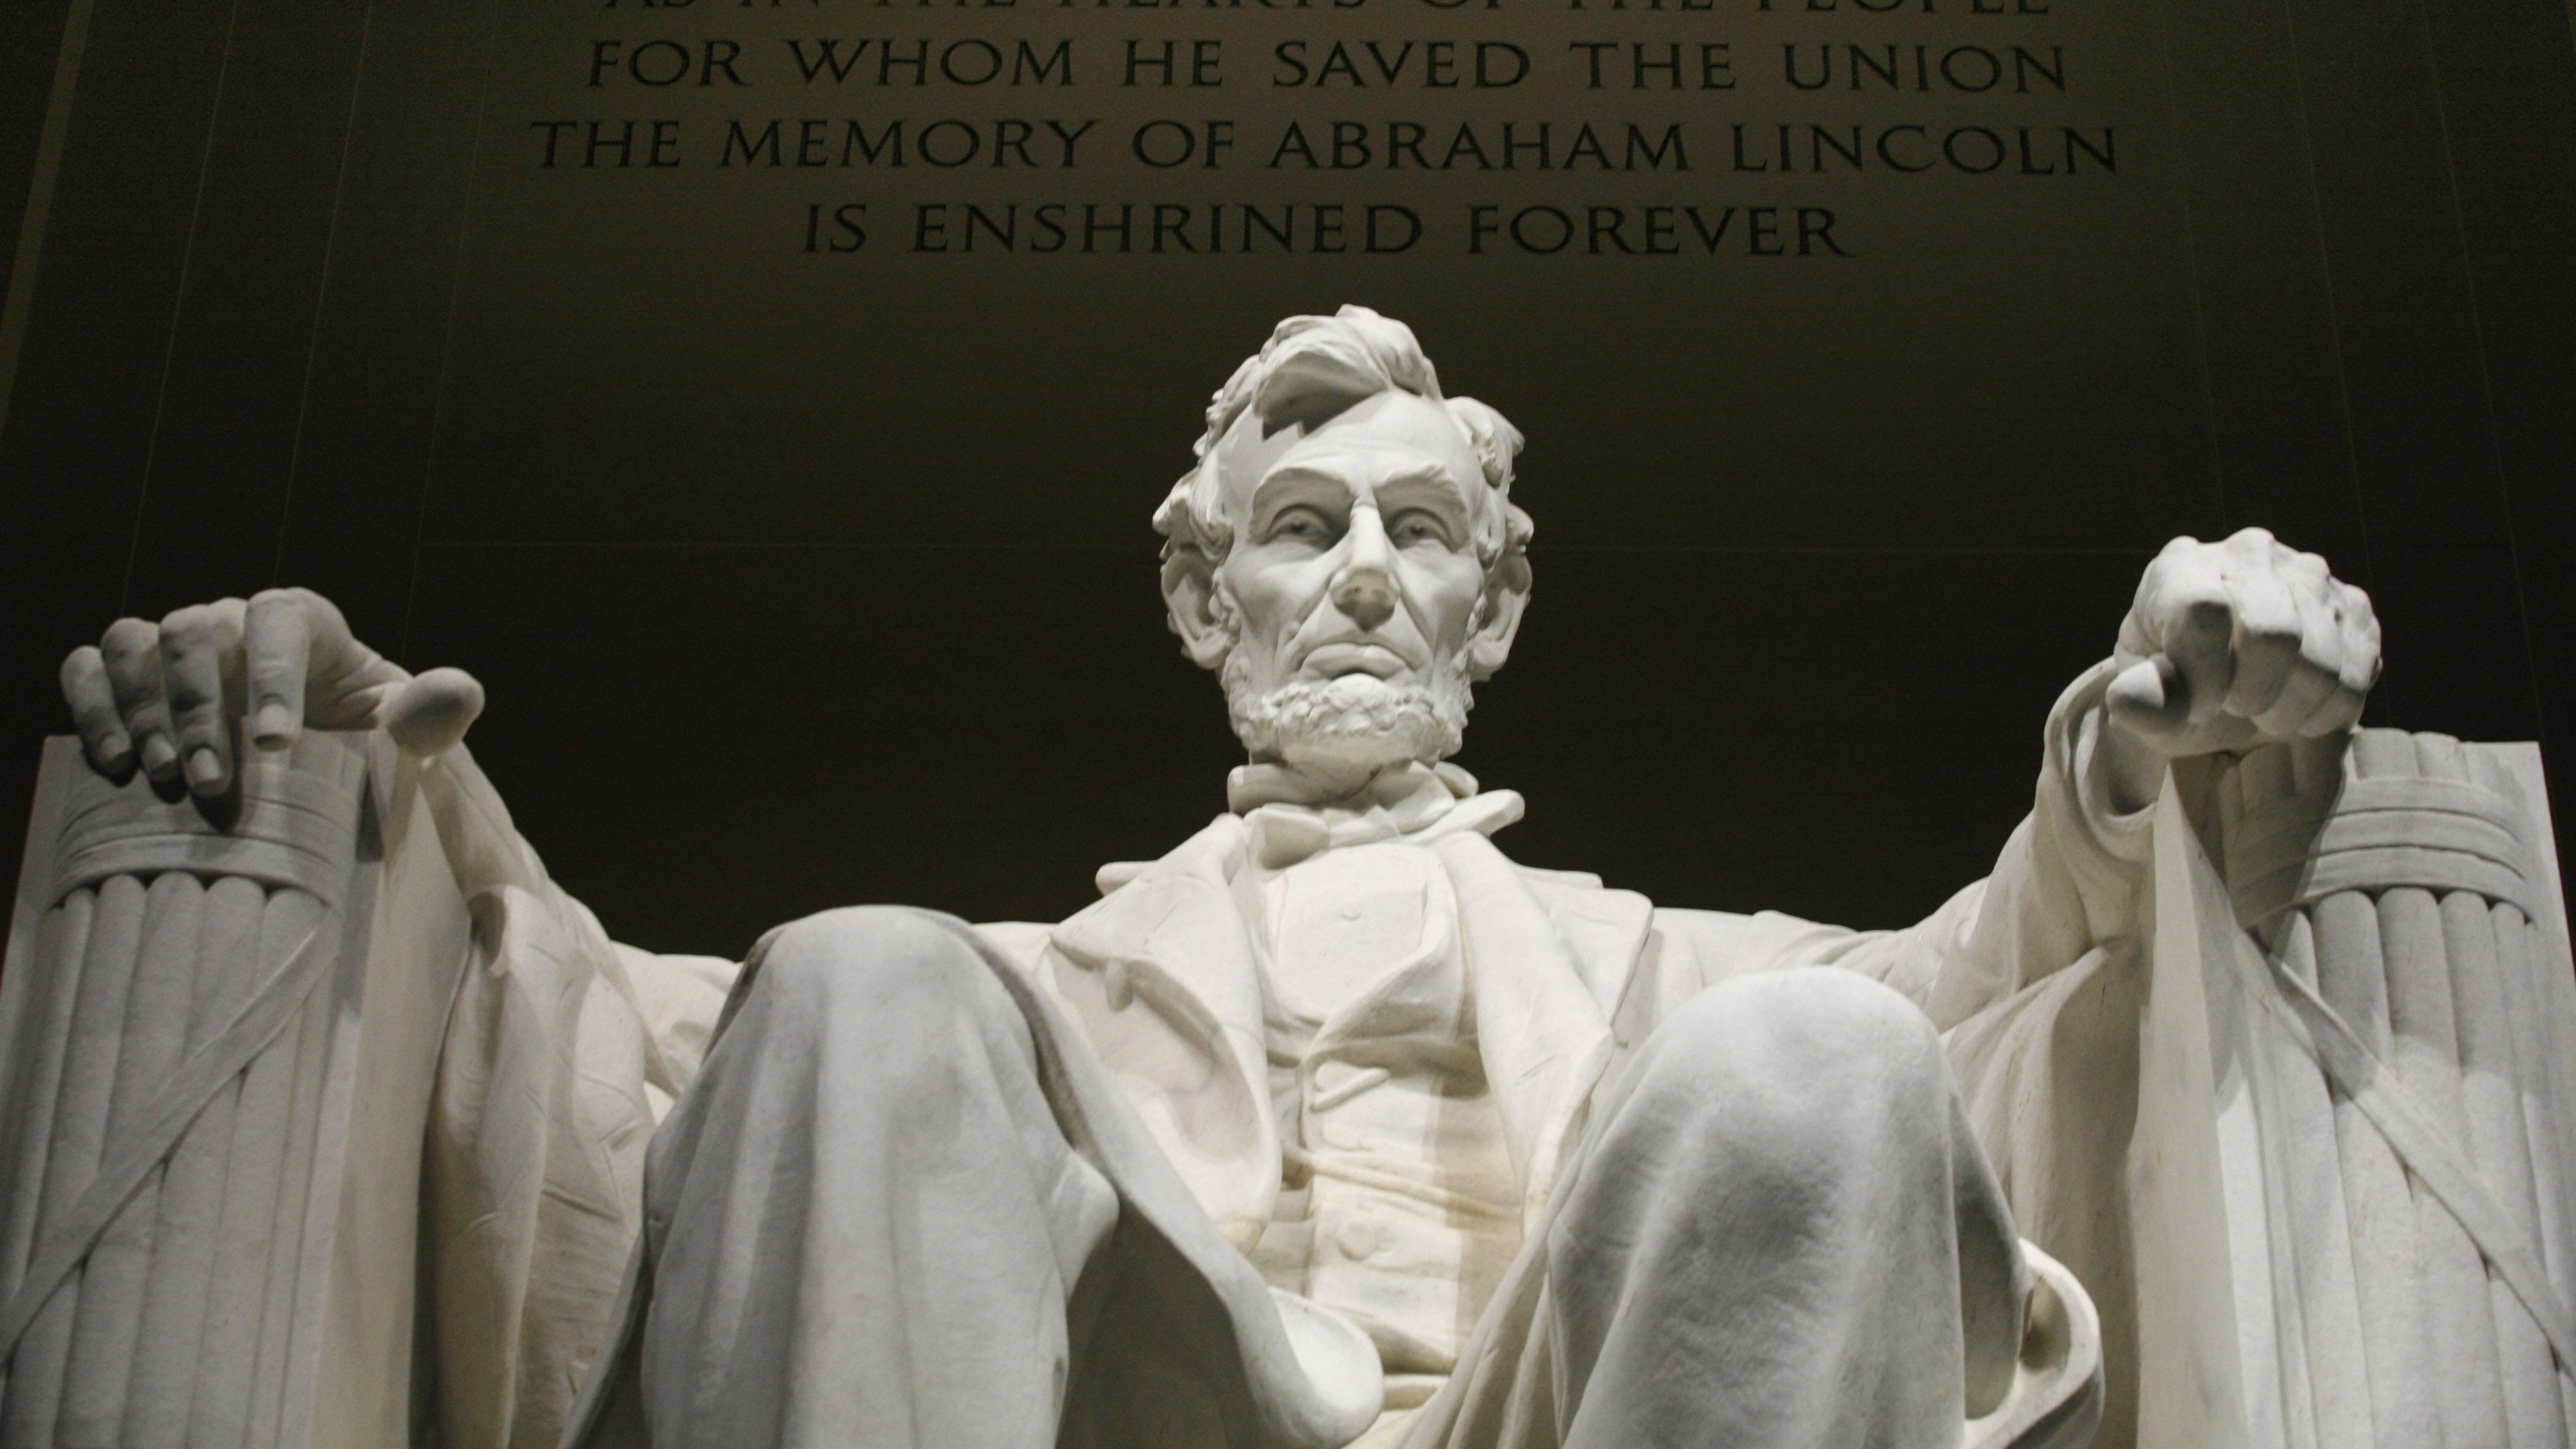 American politicians can still learn from president Abraham Lincoln ...